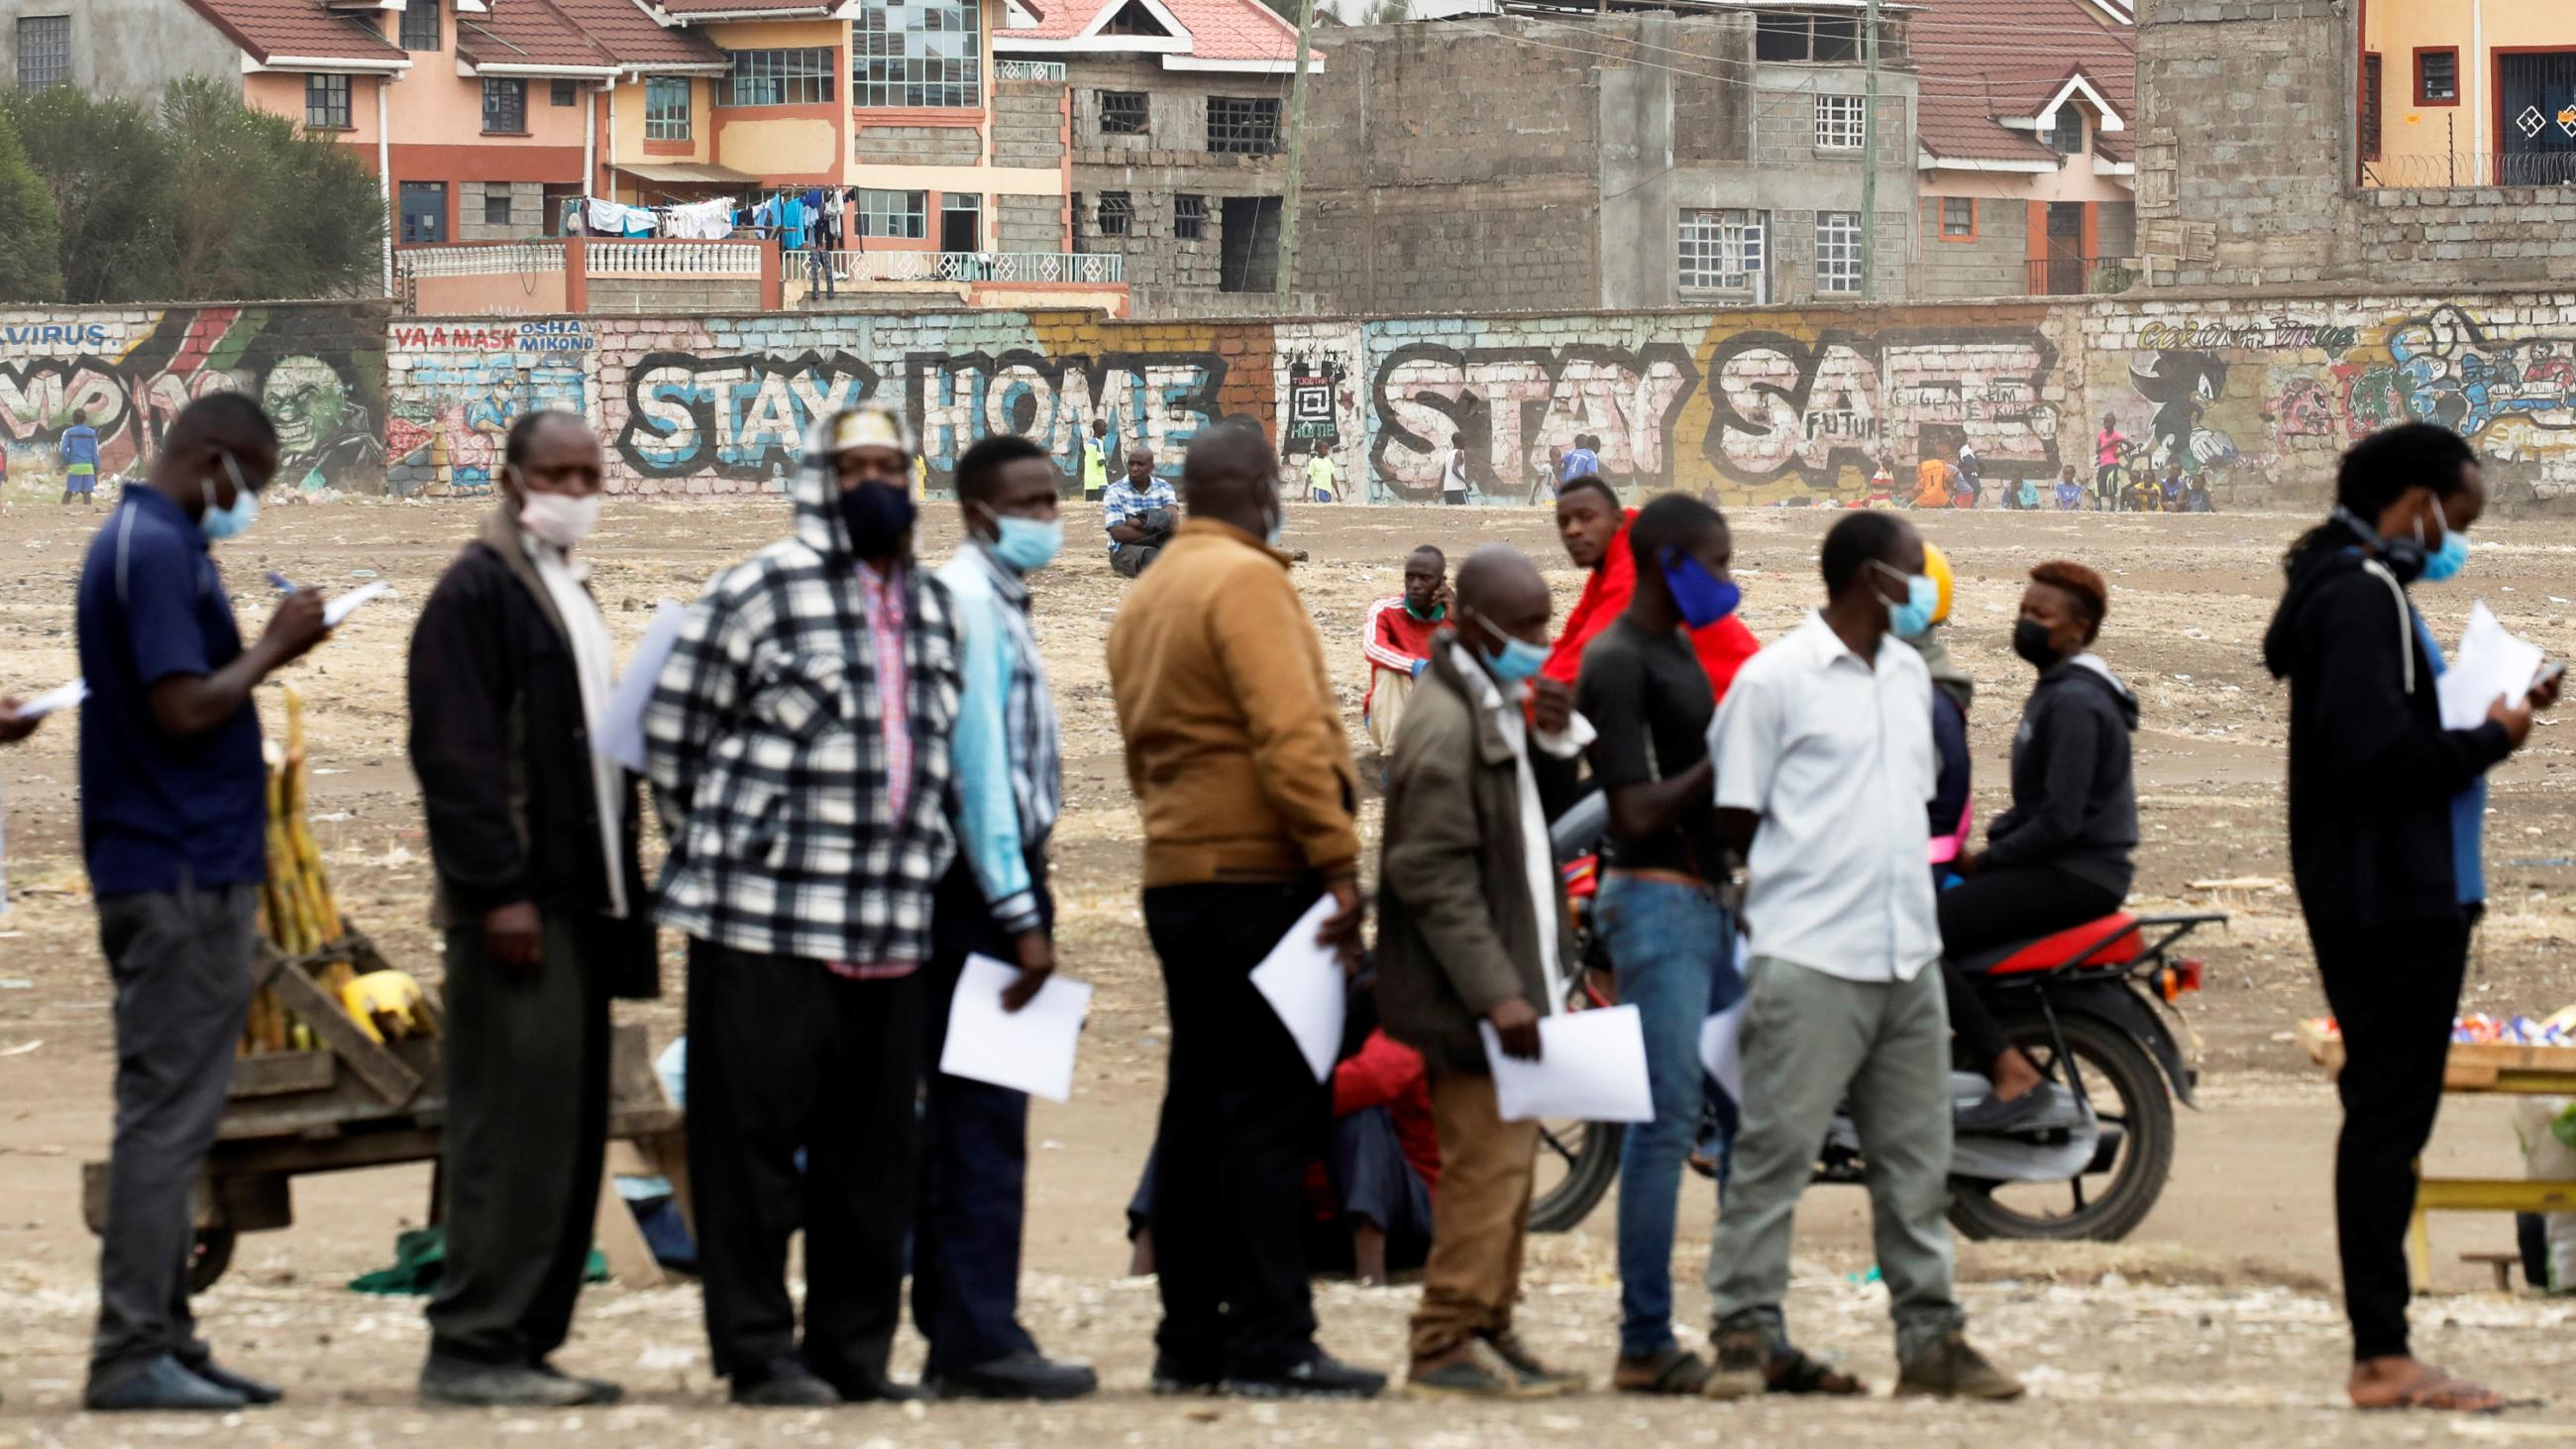 People wait in line to receive the AstraZeneca/Oxford COVID-19 vaccine, donated to Kenya by the UK government, in Nairobi, Kenya, August 8, 2021